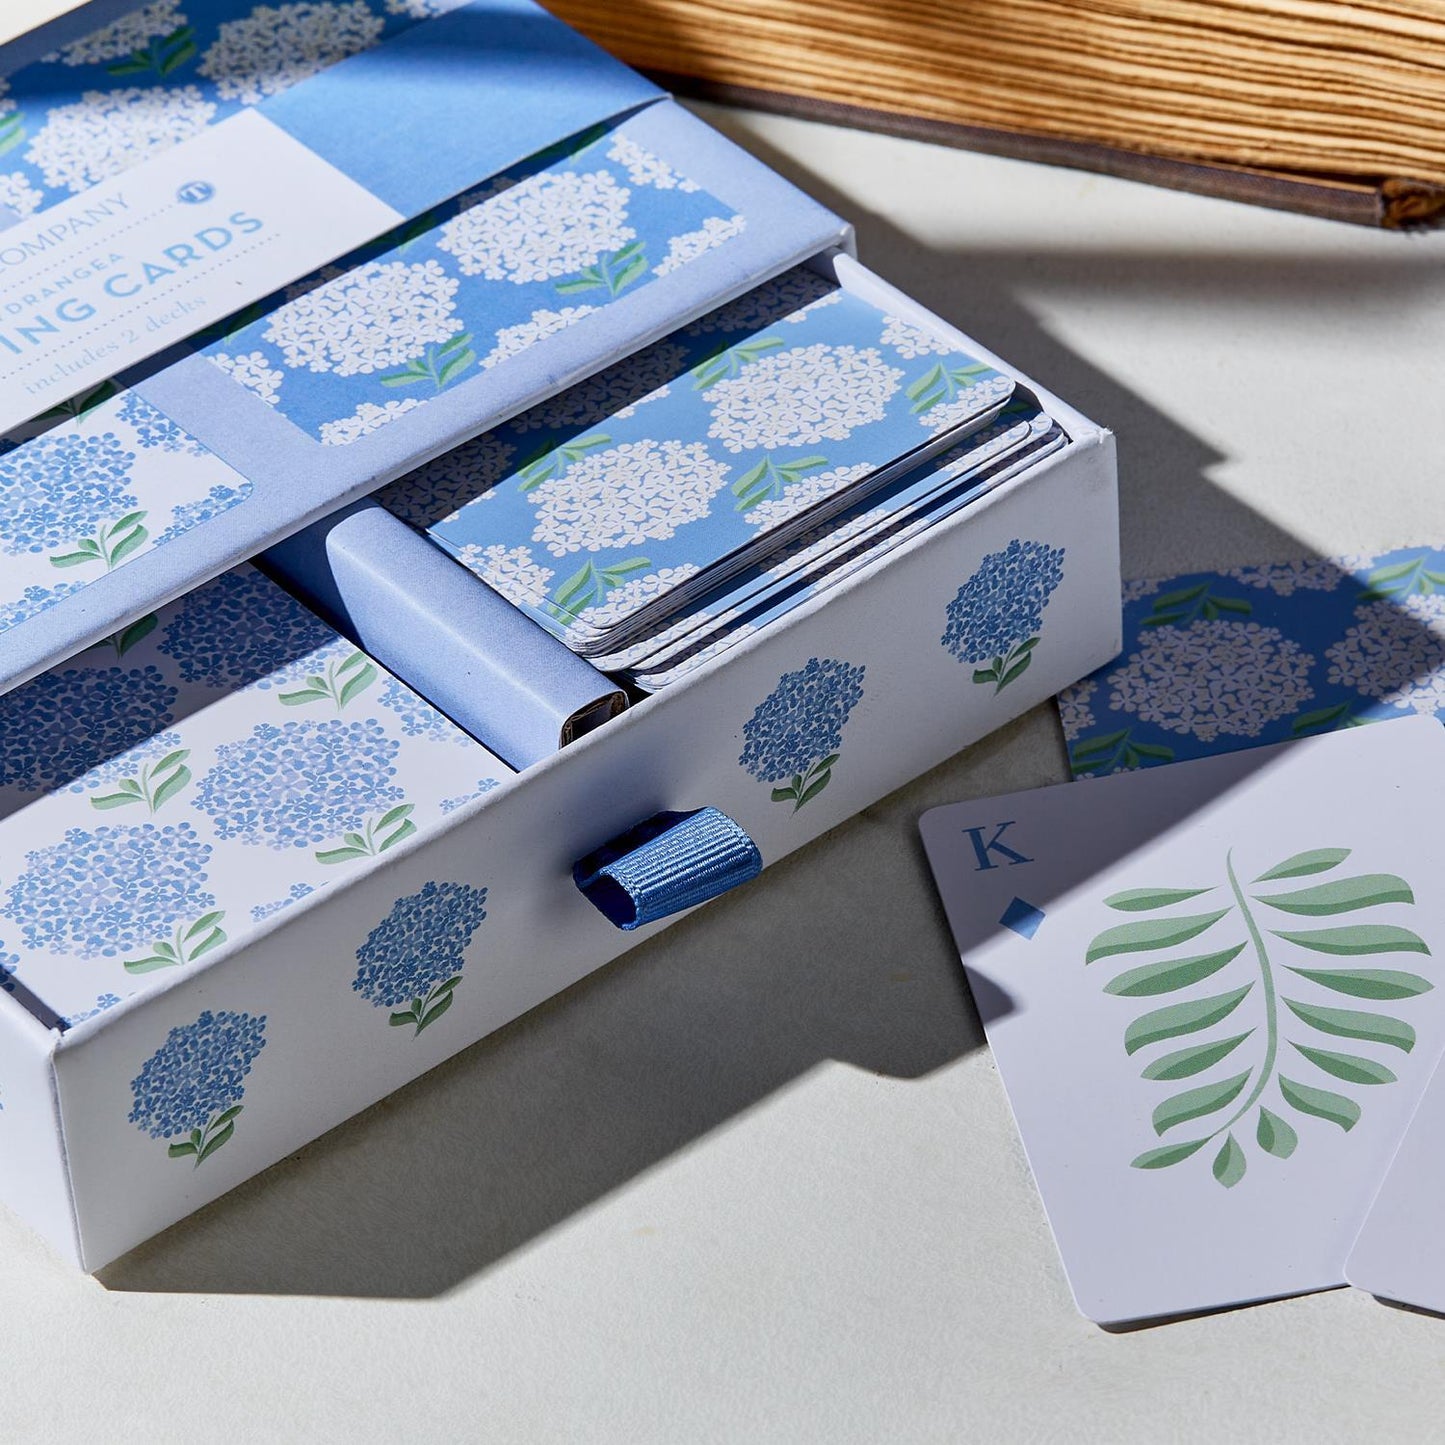 Hydrangea Double Deck Playing Cards in Gift Box